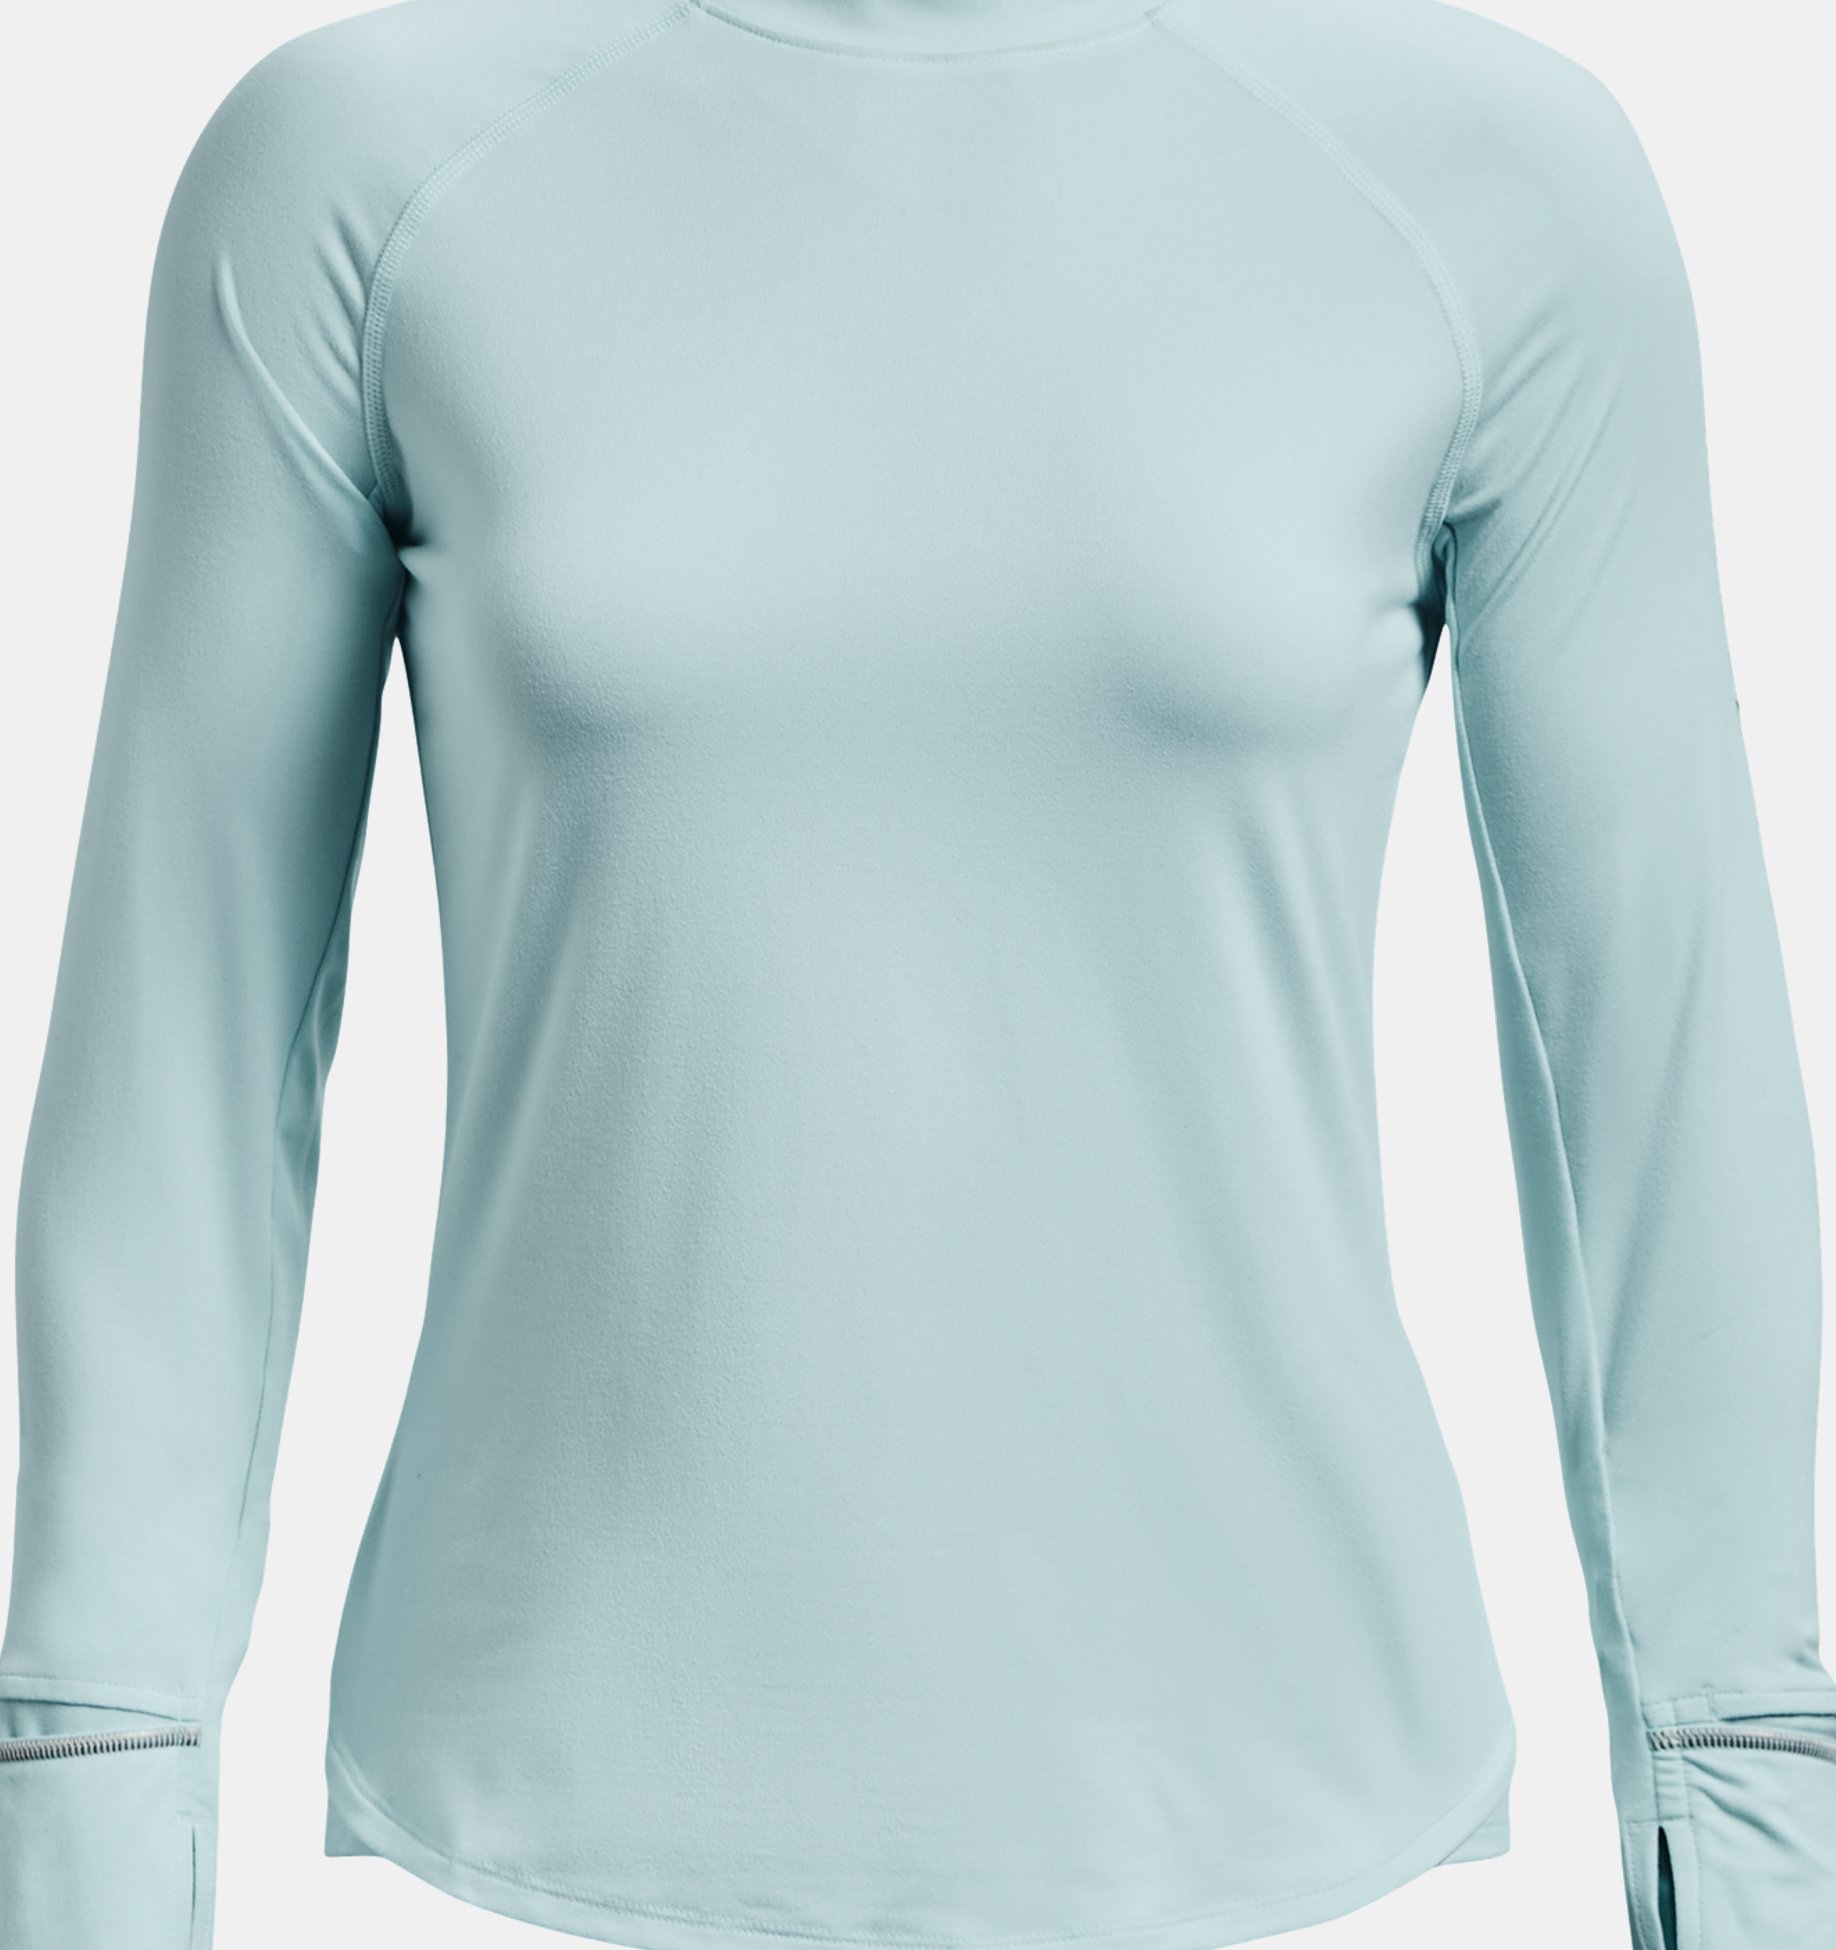 Buy Under Armour Men's UA Outrun The Cold Long Sleeve from £15.00 (Today) –  Best Deals on